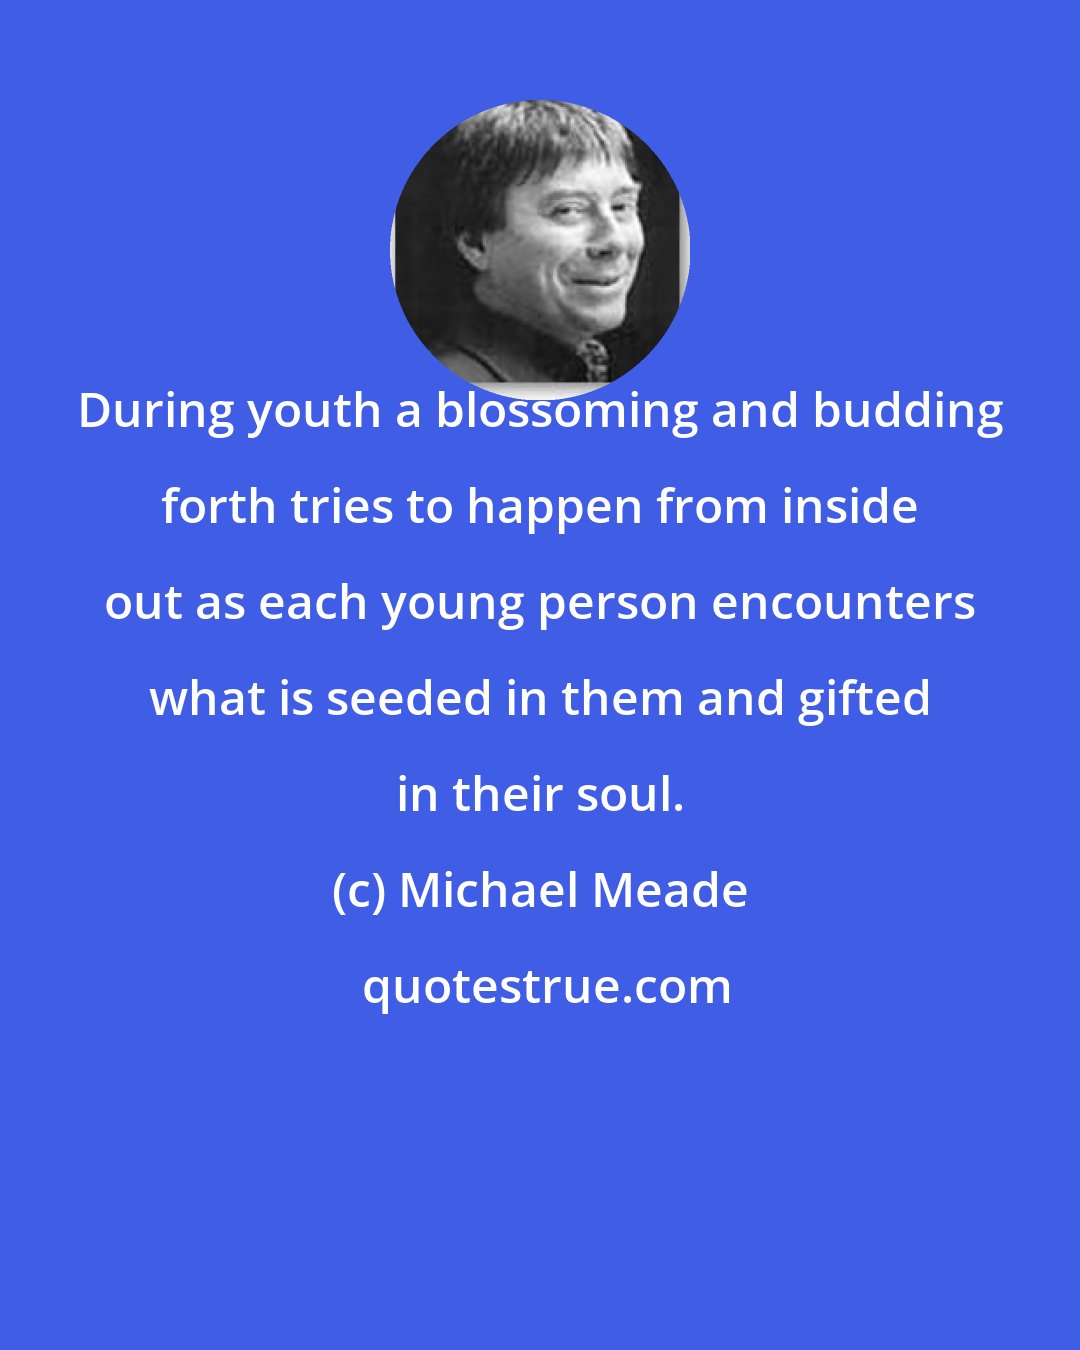 Michael Meade: During youth a blossoming and budding forth tries to happen from inside out as each young person encounters what is seeded in them and gifted in their soul.